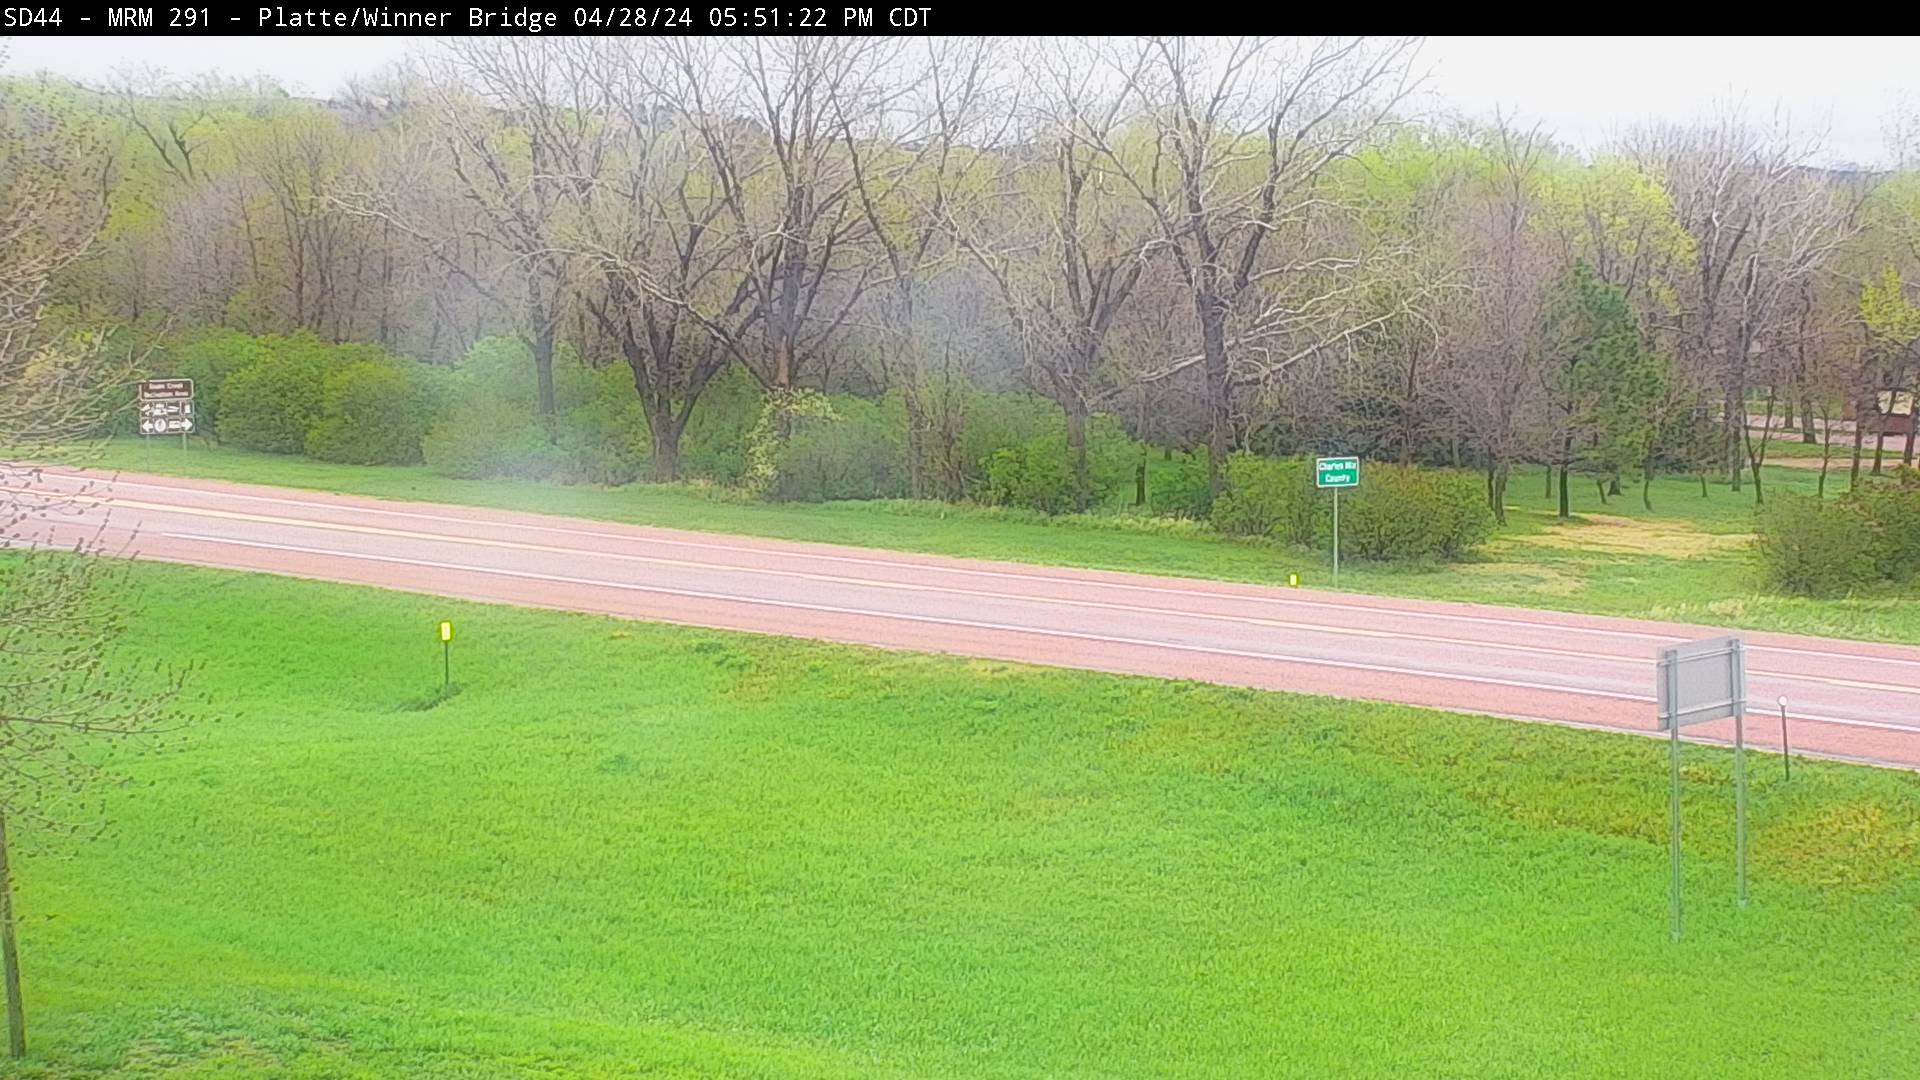 West of town along SD-44 @ MP 291.6 - East Traffic Camera